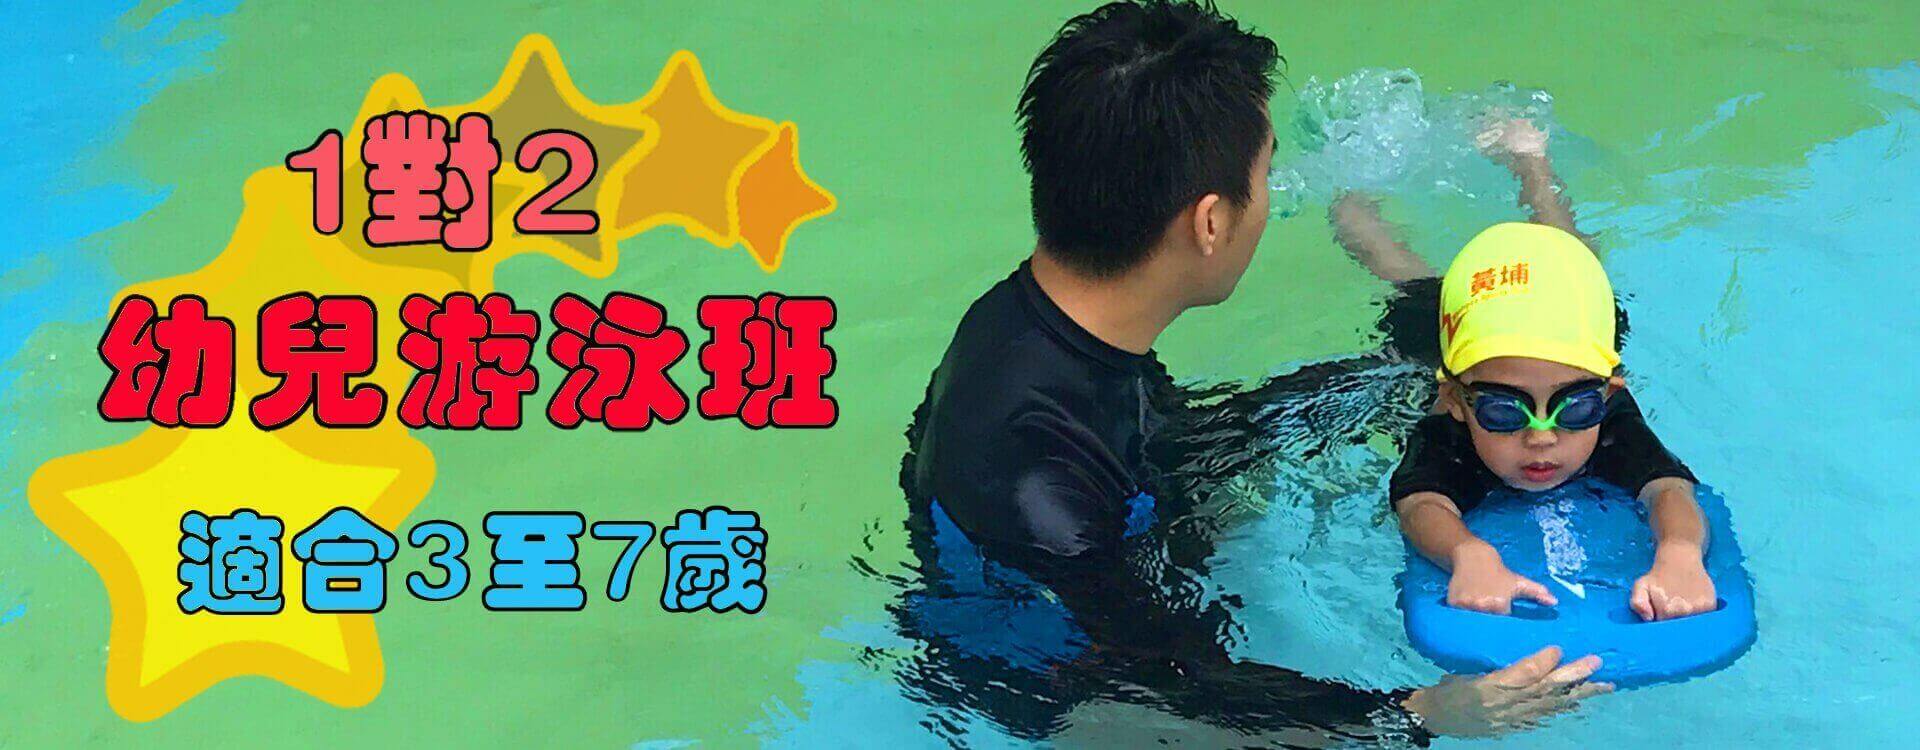 7 Weeks Swimming Lessons - how to swim fast | Whampoa Sports Club